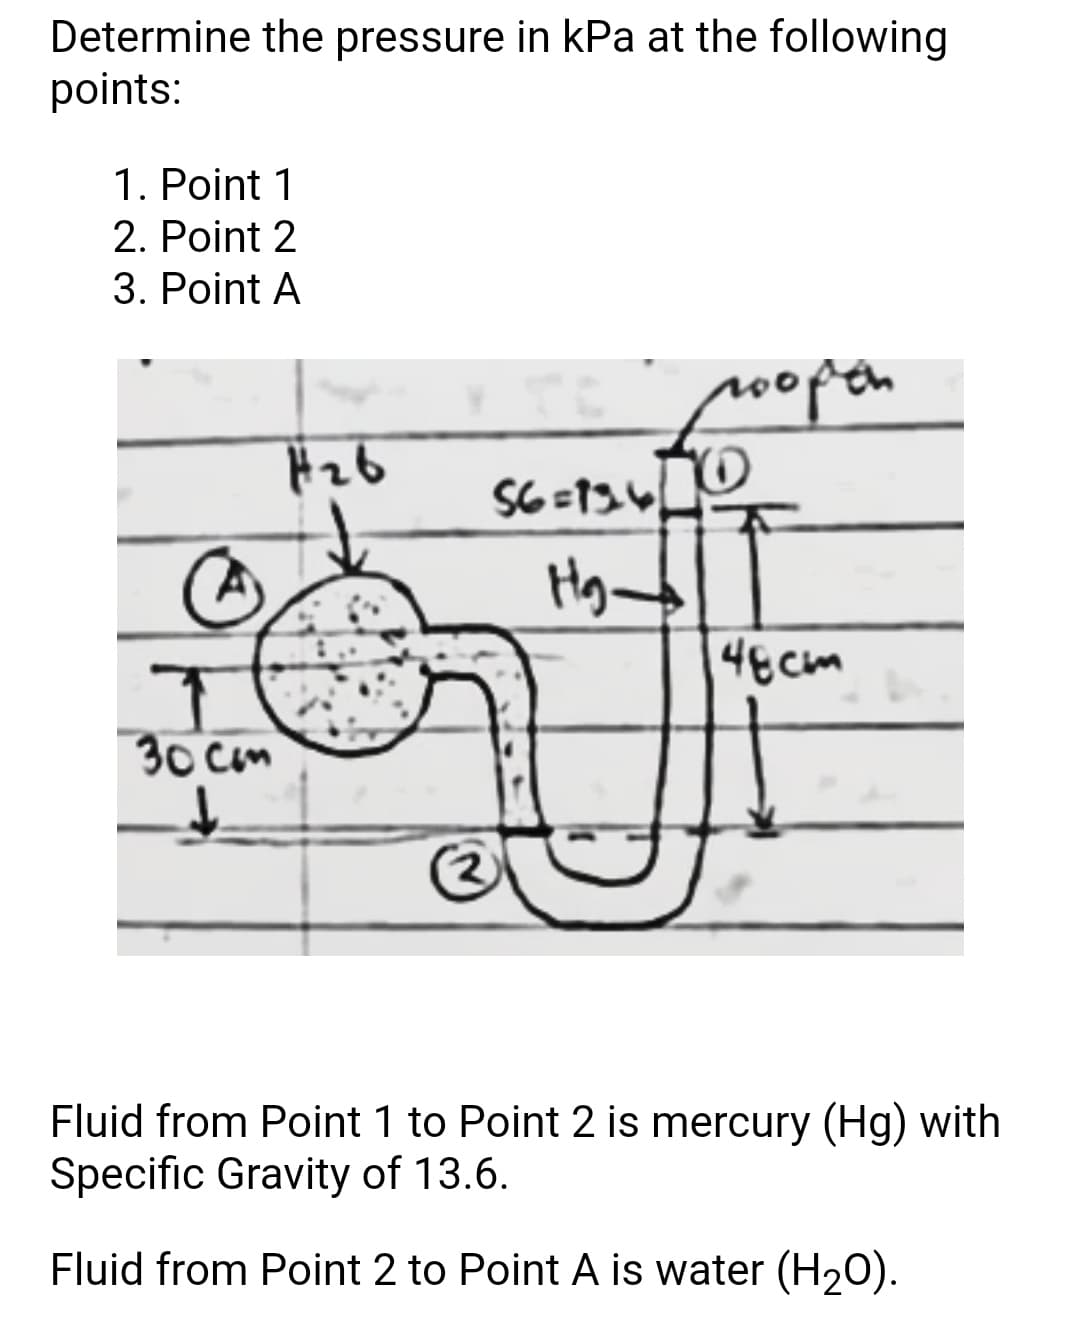 Determine the pressure in kPa at the following
points:
1. Point 1
2. Point 2
3. Point A
0opetn
4ECM
30 cm
Fluid from Point 1 to Point 2 is mercury (Hg) with
Specific Gravity of 13.6.
Fluid from Point 2 to Point A is water (H20).
